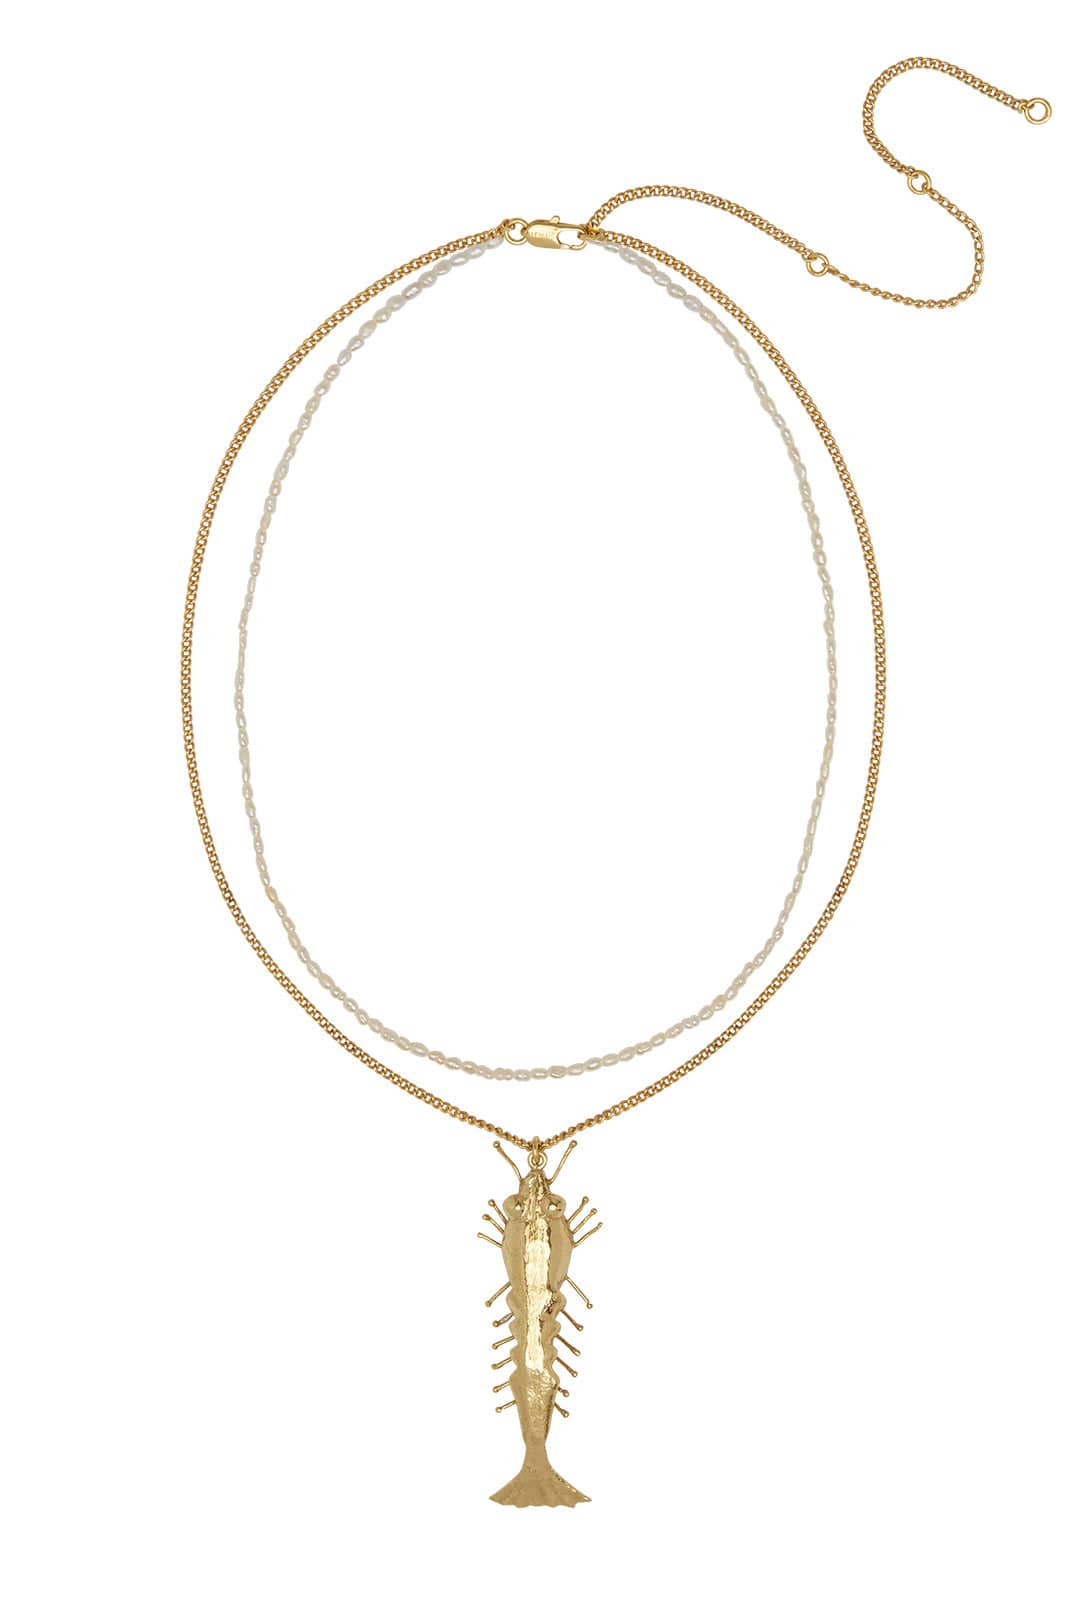 BANANA HOUSE LOBSTER PEARL NECKLACE